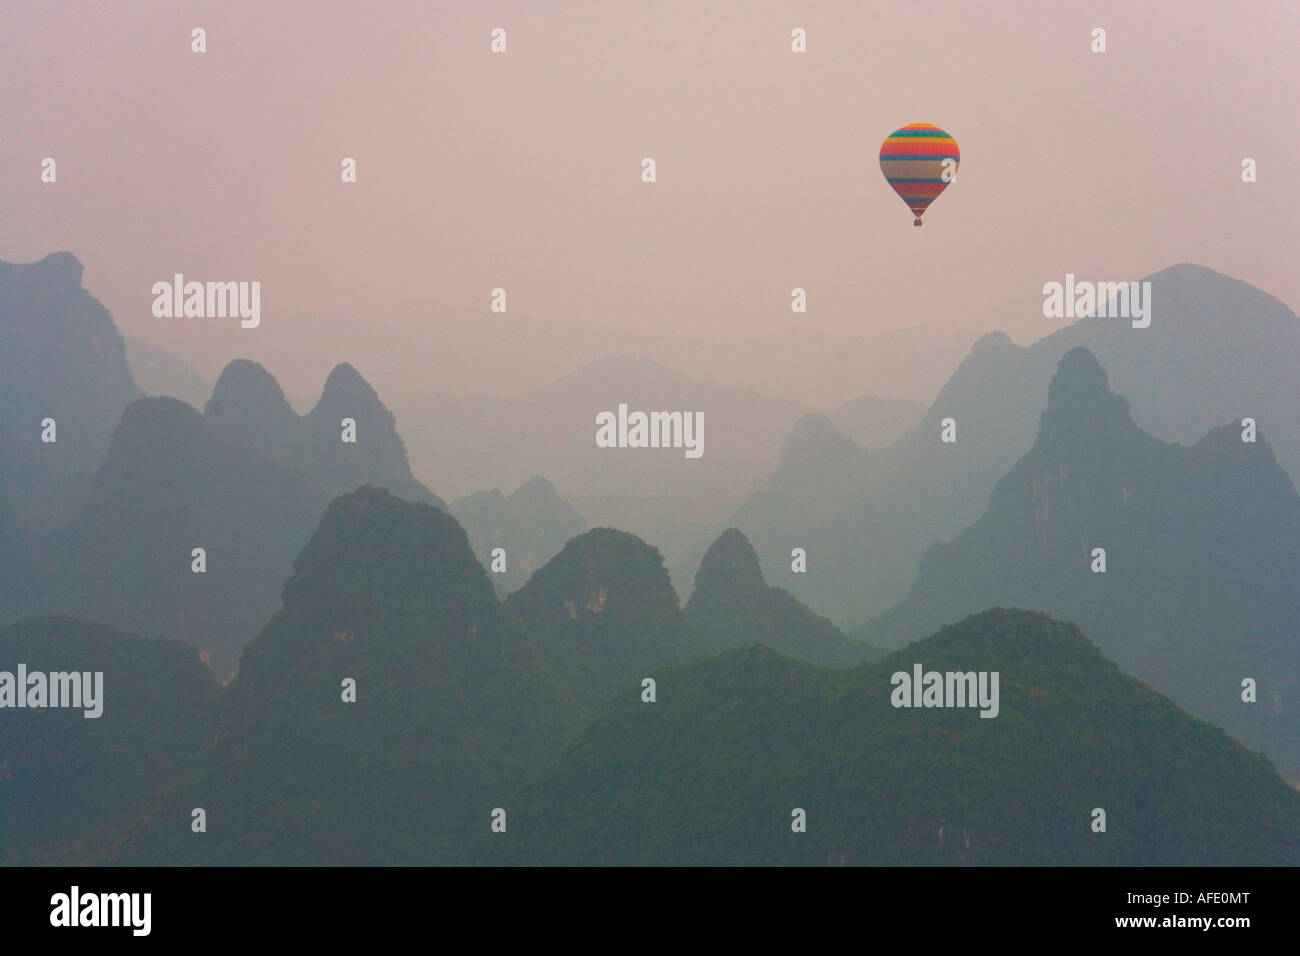 Karst landscape of Yangshuo from Moon Hill Guanxi Province China Stock Photo